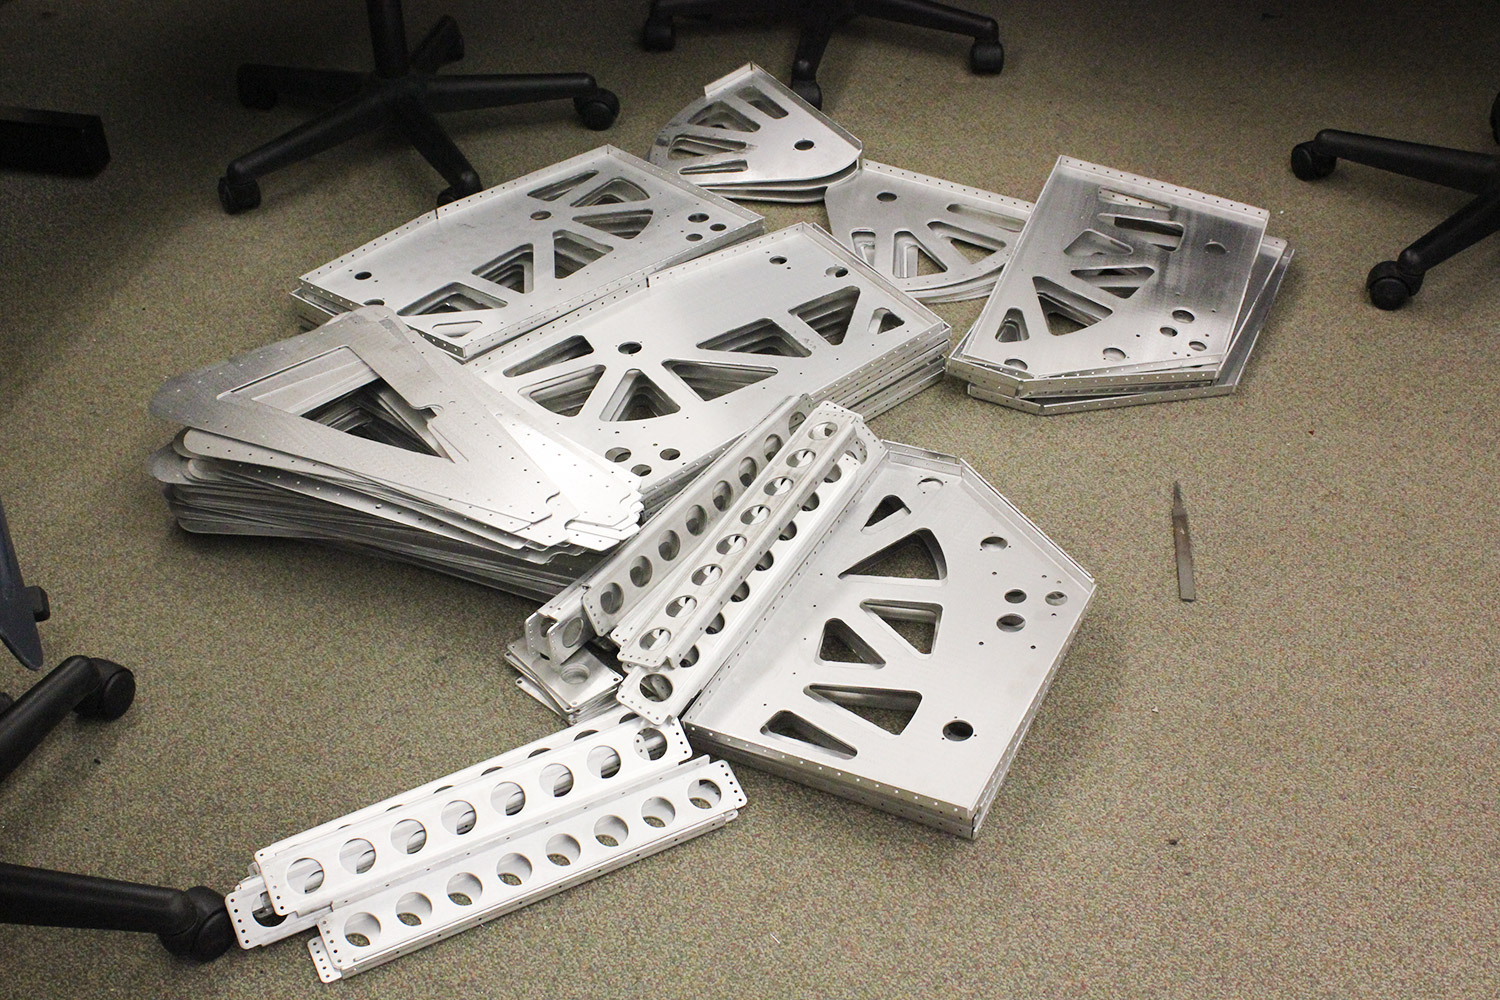 Robots were finalized using CAD software and parts were fabricated at a machine shop.